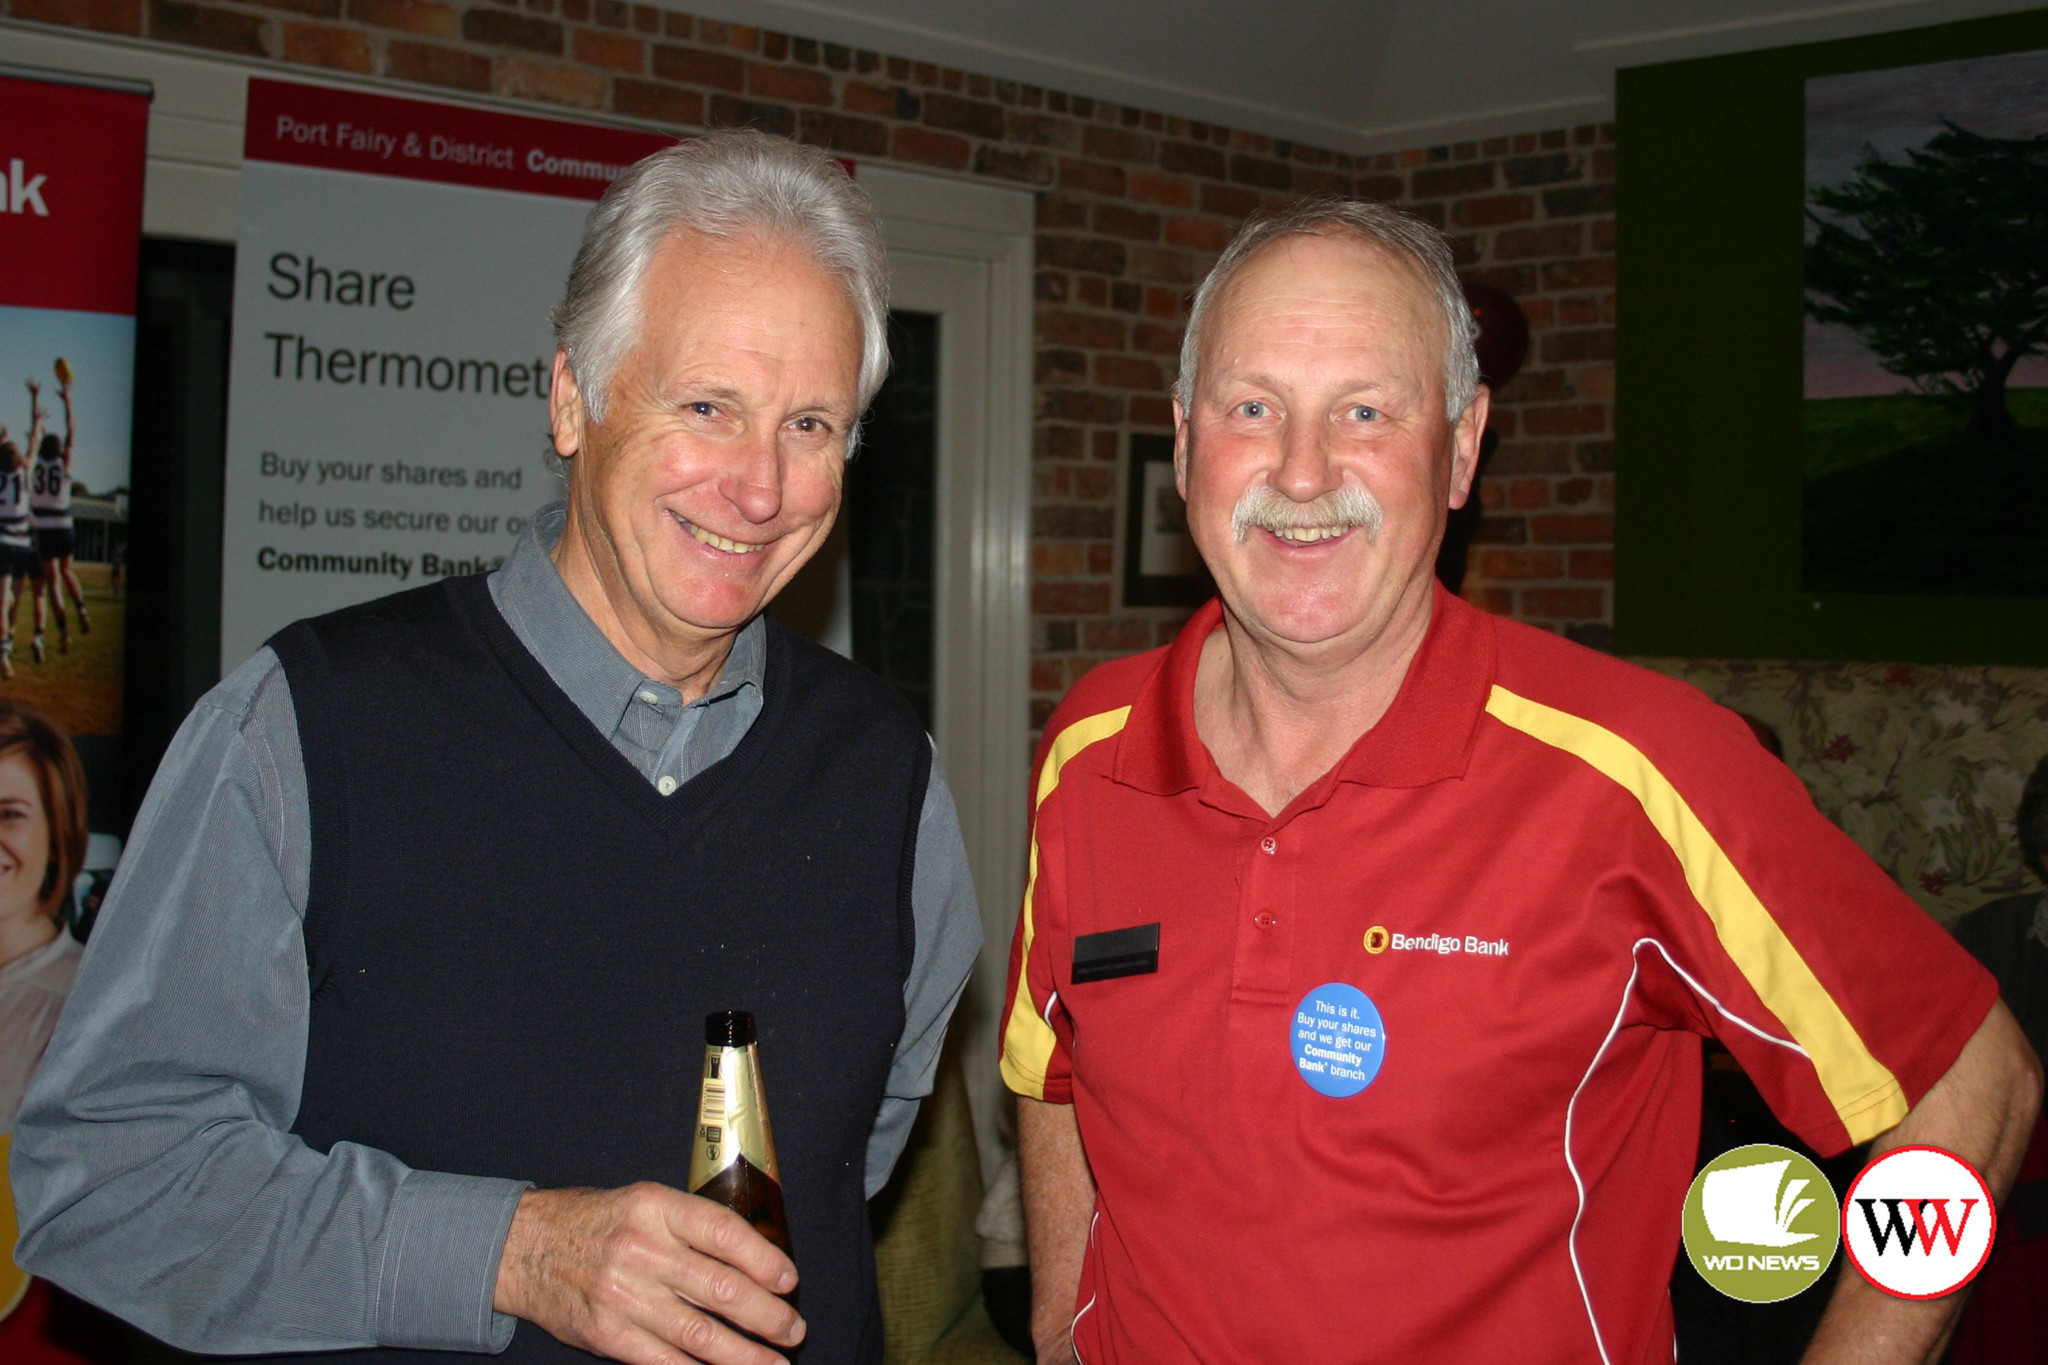 Like so many people in Port Fairy, Peter Langley (the one in red) is extremely proud of the town’s Community Bank.